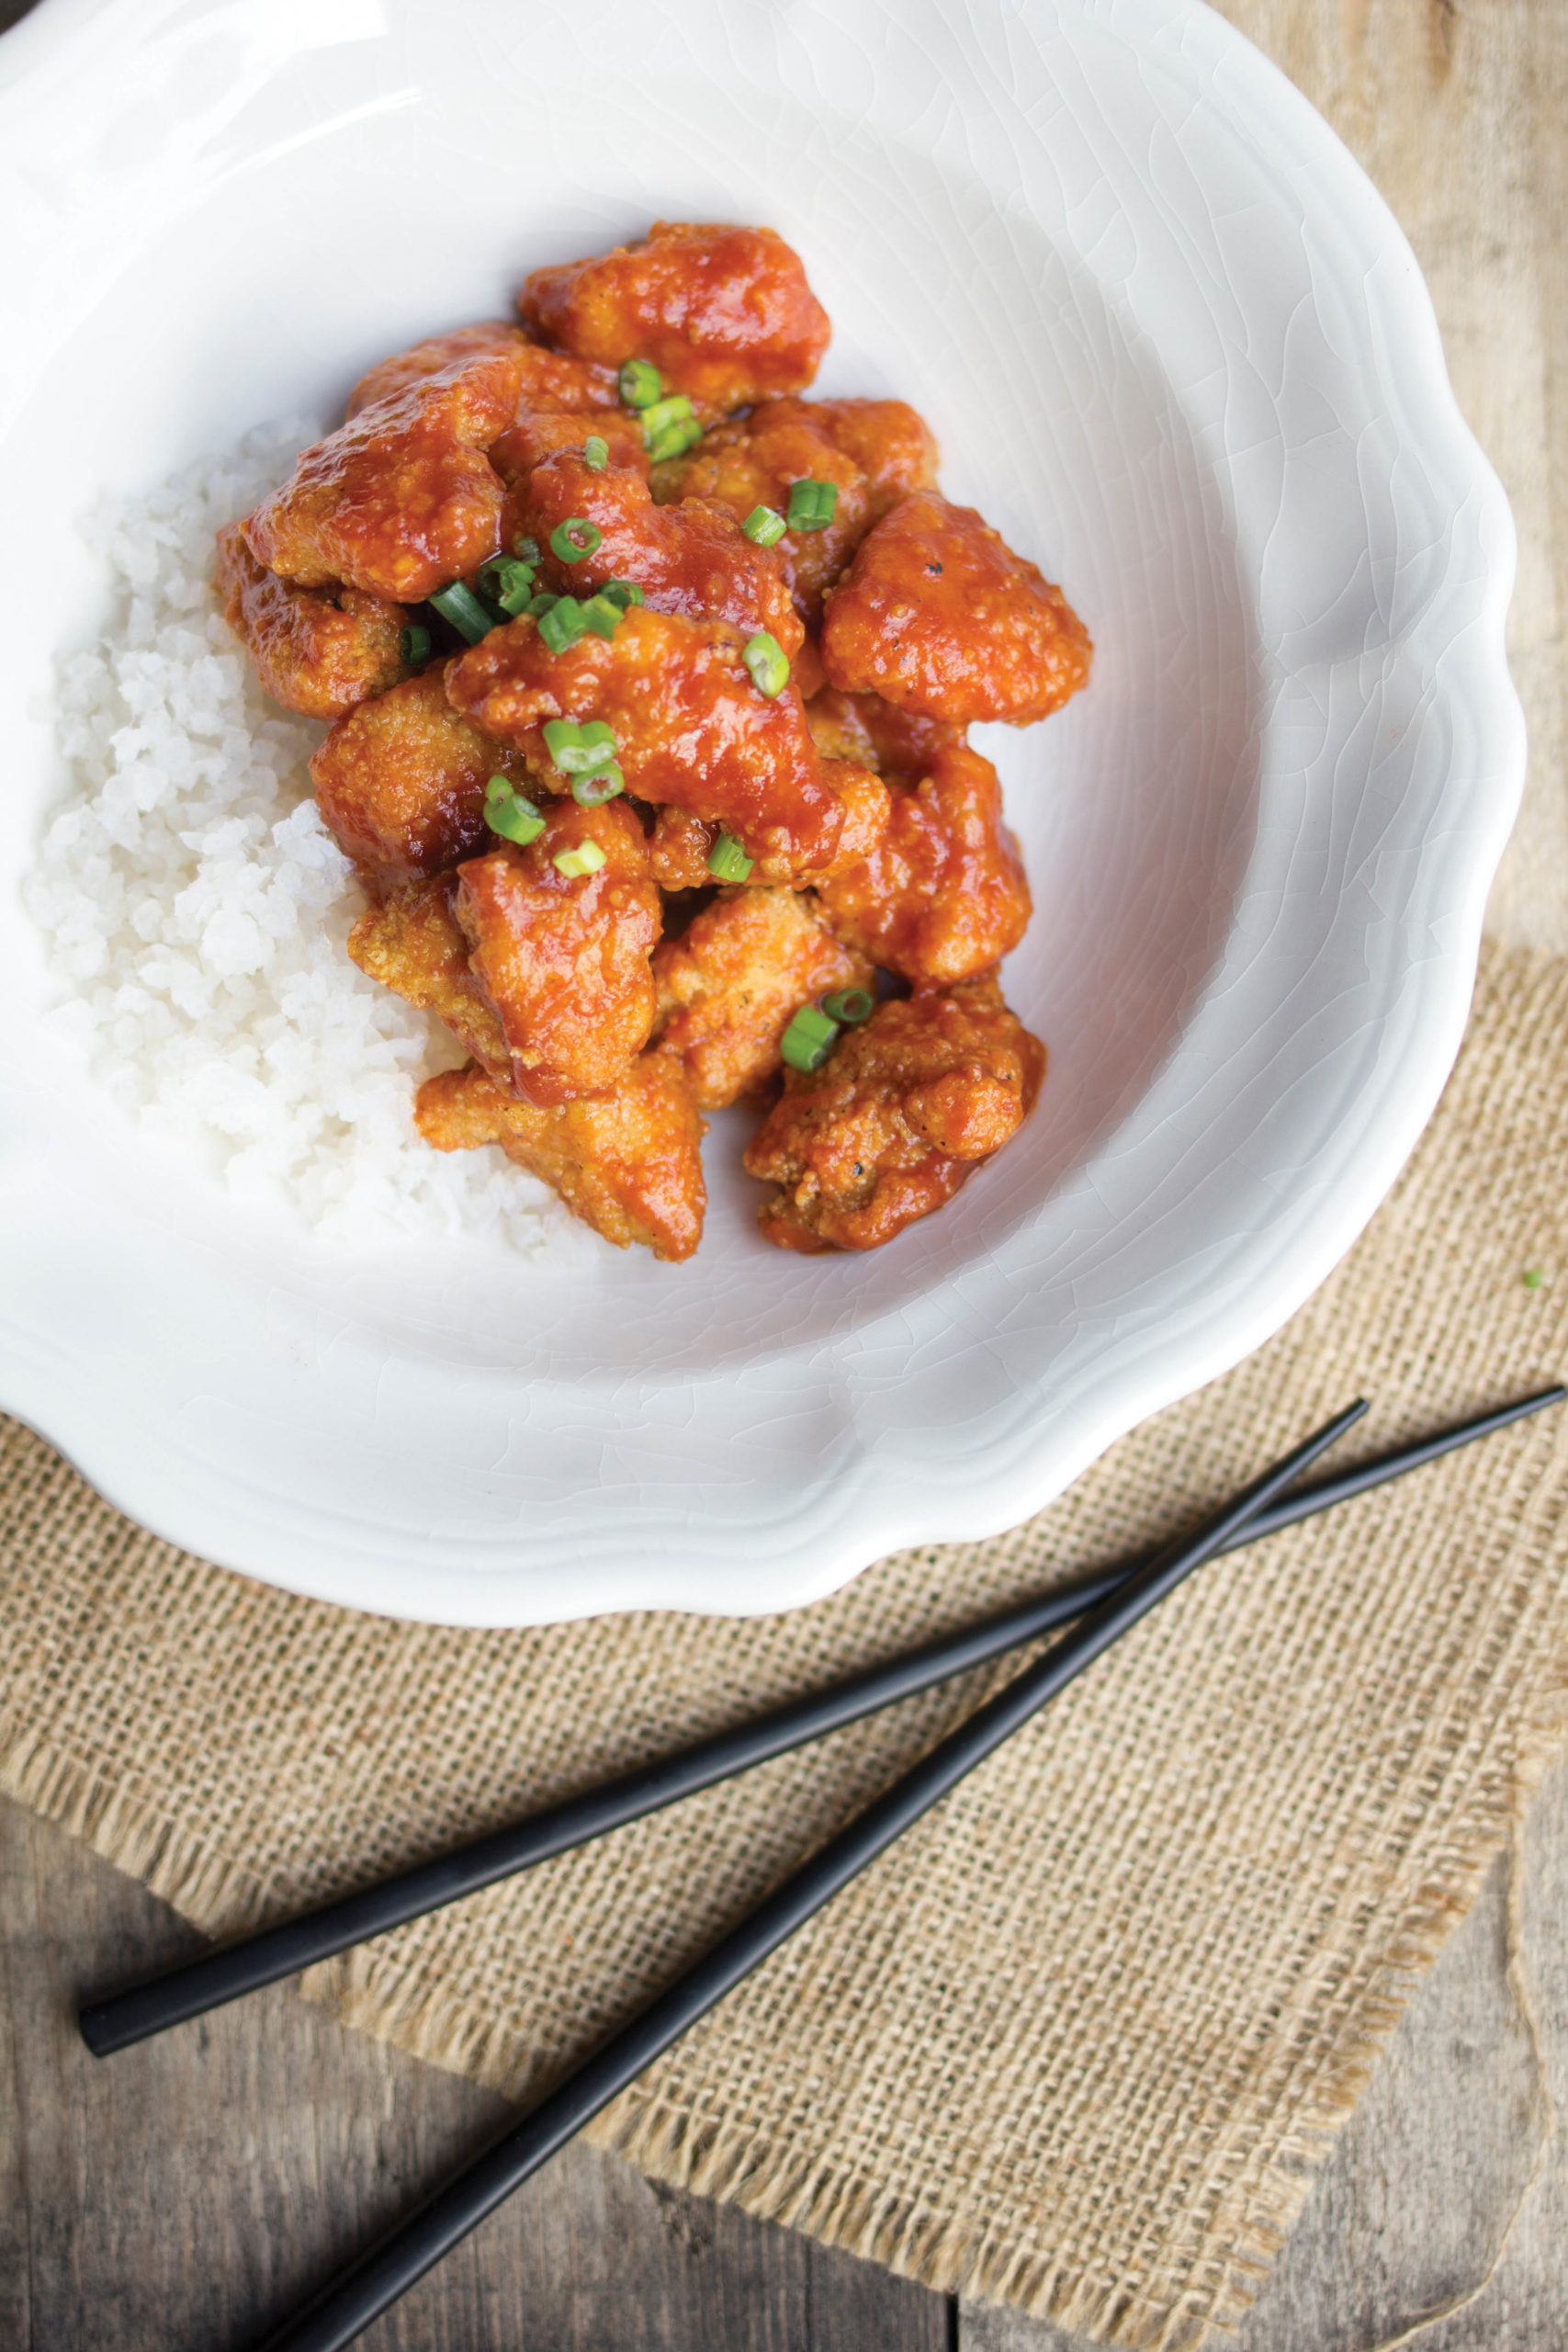 The perfect takeout creation of crispy fried chicken covered in a keto sweet and sour sauce. Make two batches of this keto sweet and sour chicken because it's that good!